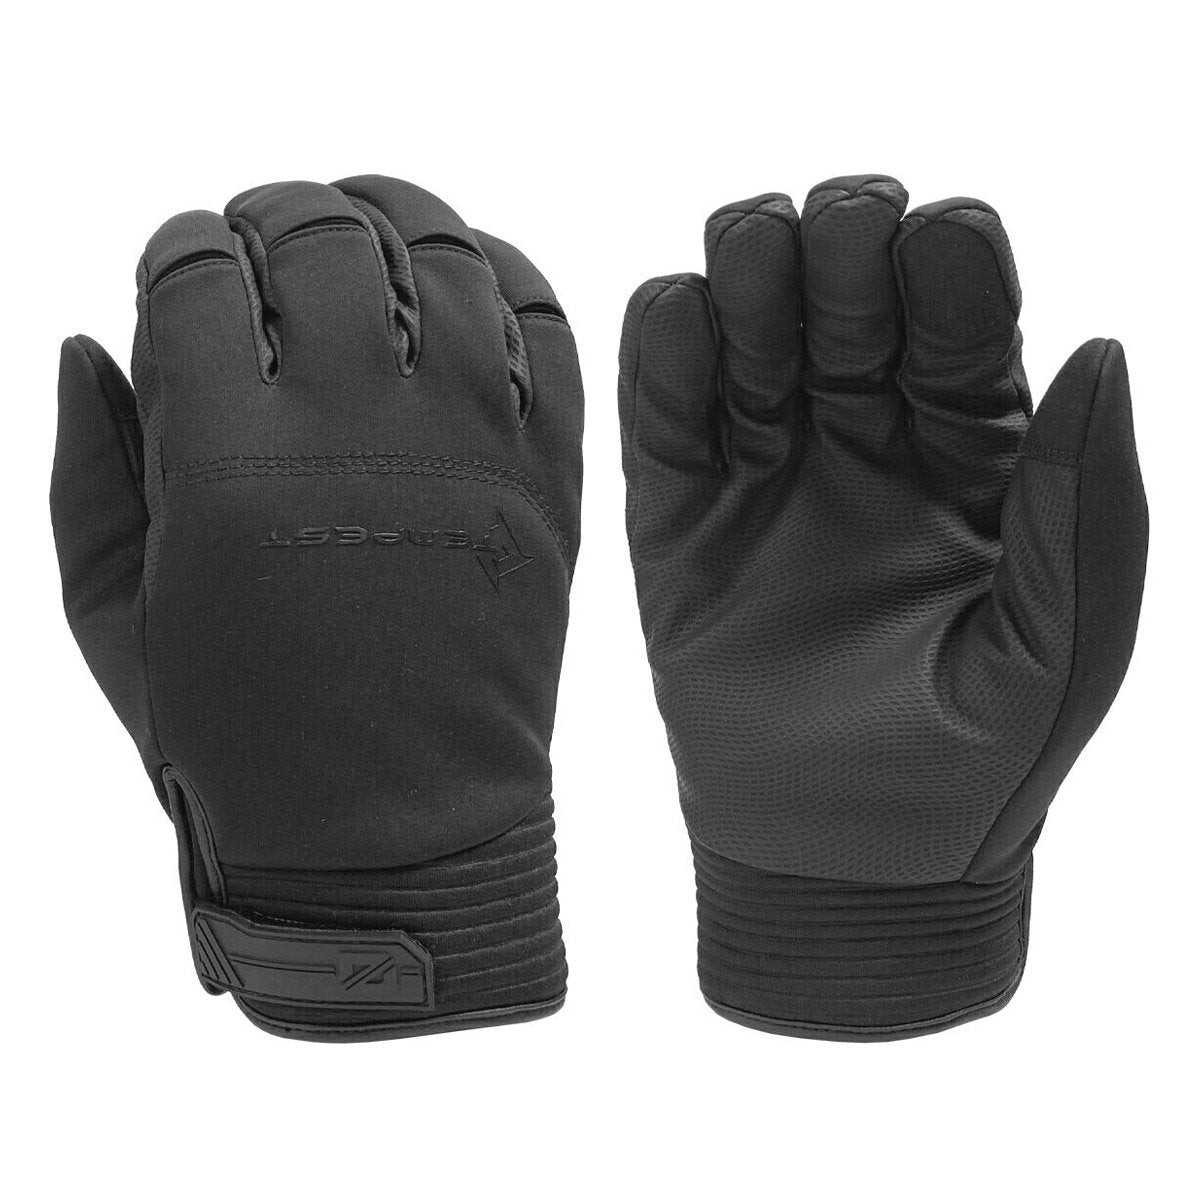 Damascus Tempest Advanced All-Weather Gloves with GripSkin | Tactial Gear Australia Tactical Gear